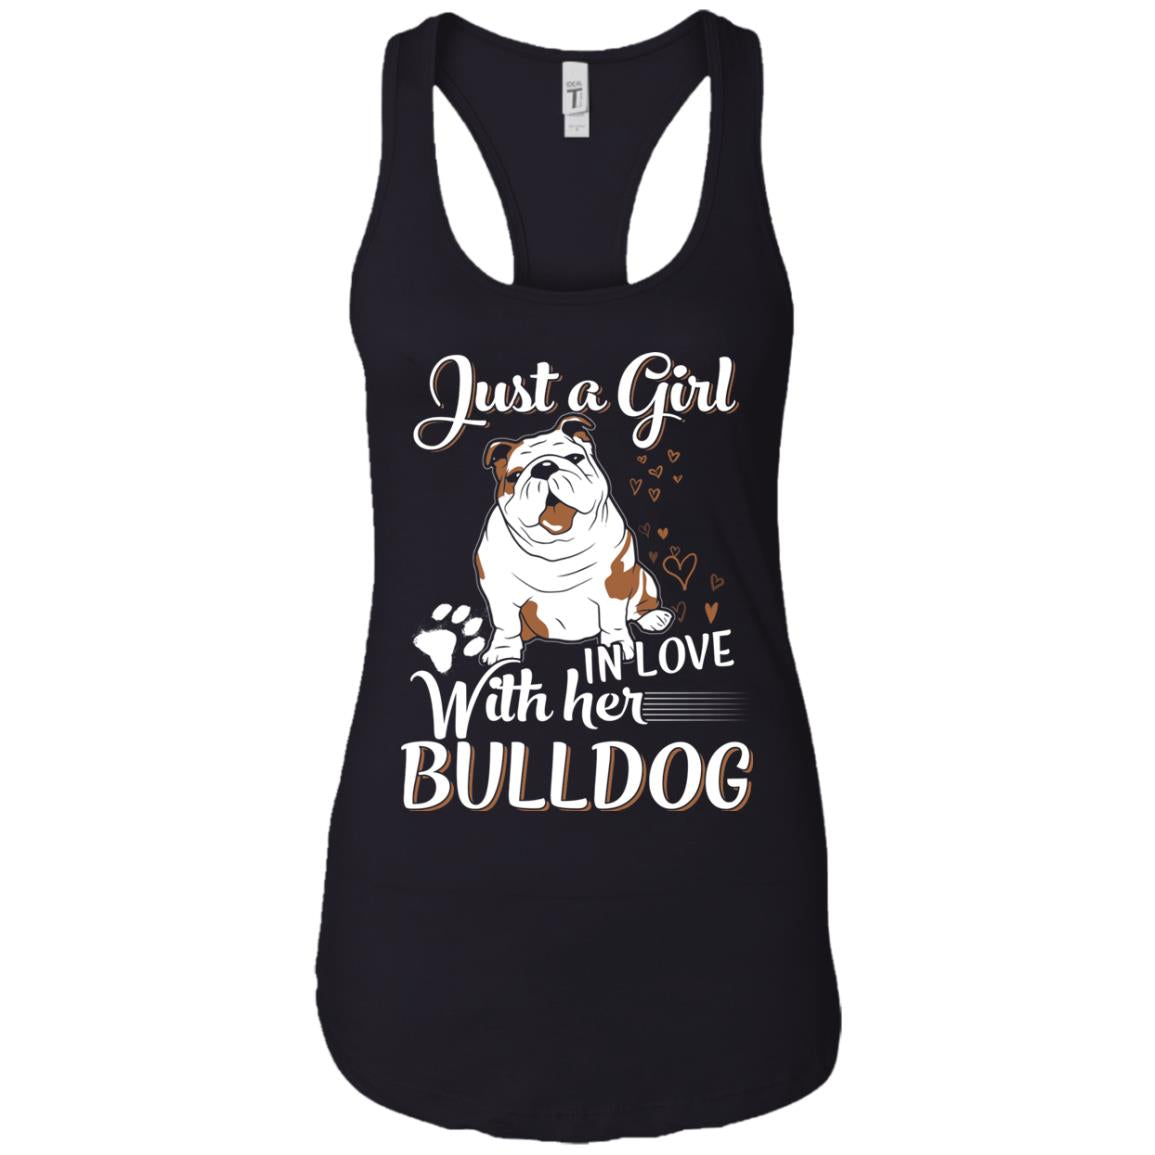 Just a Girl in Love with her Bulldog